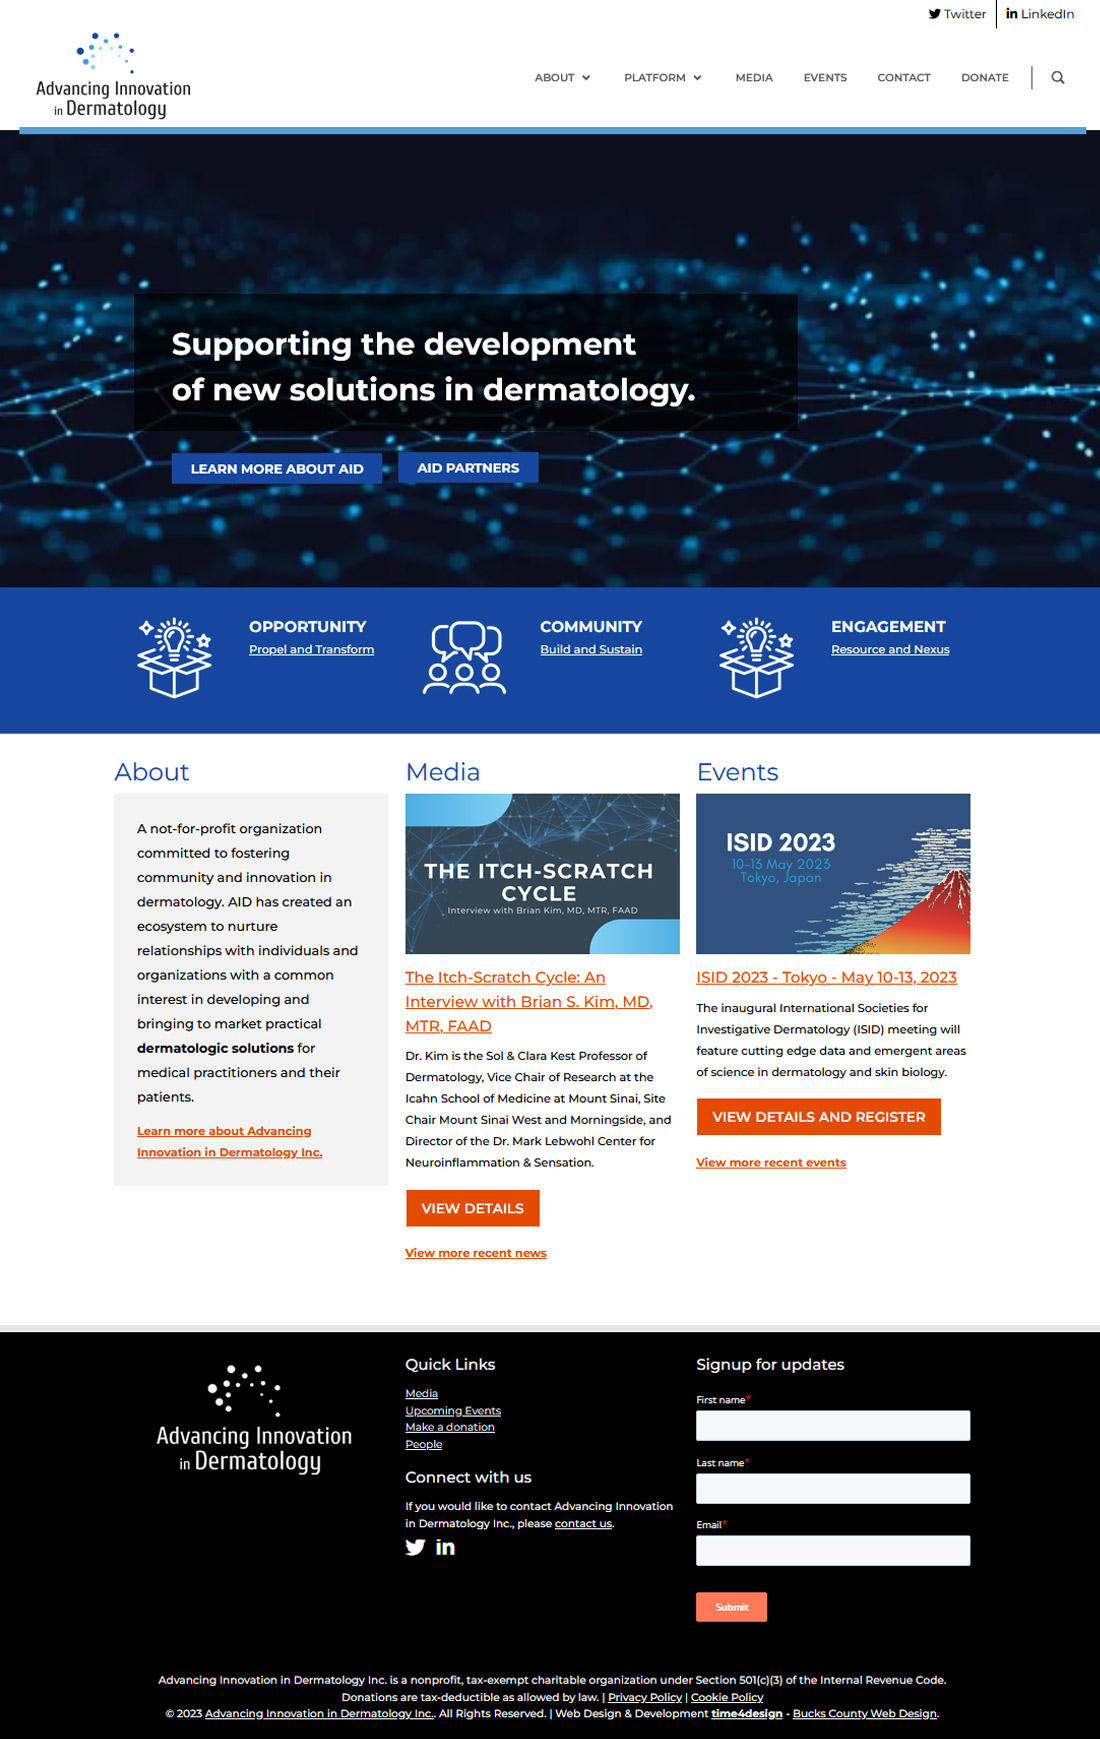 Advancing Innovation in Dermatology Homepage